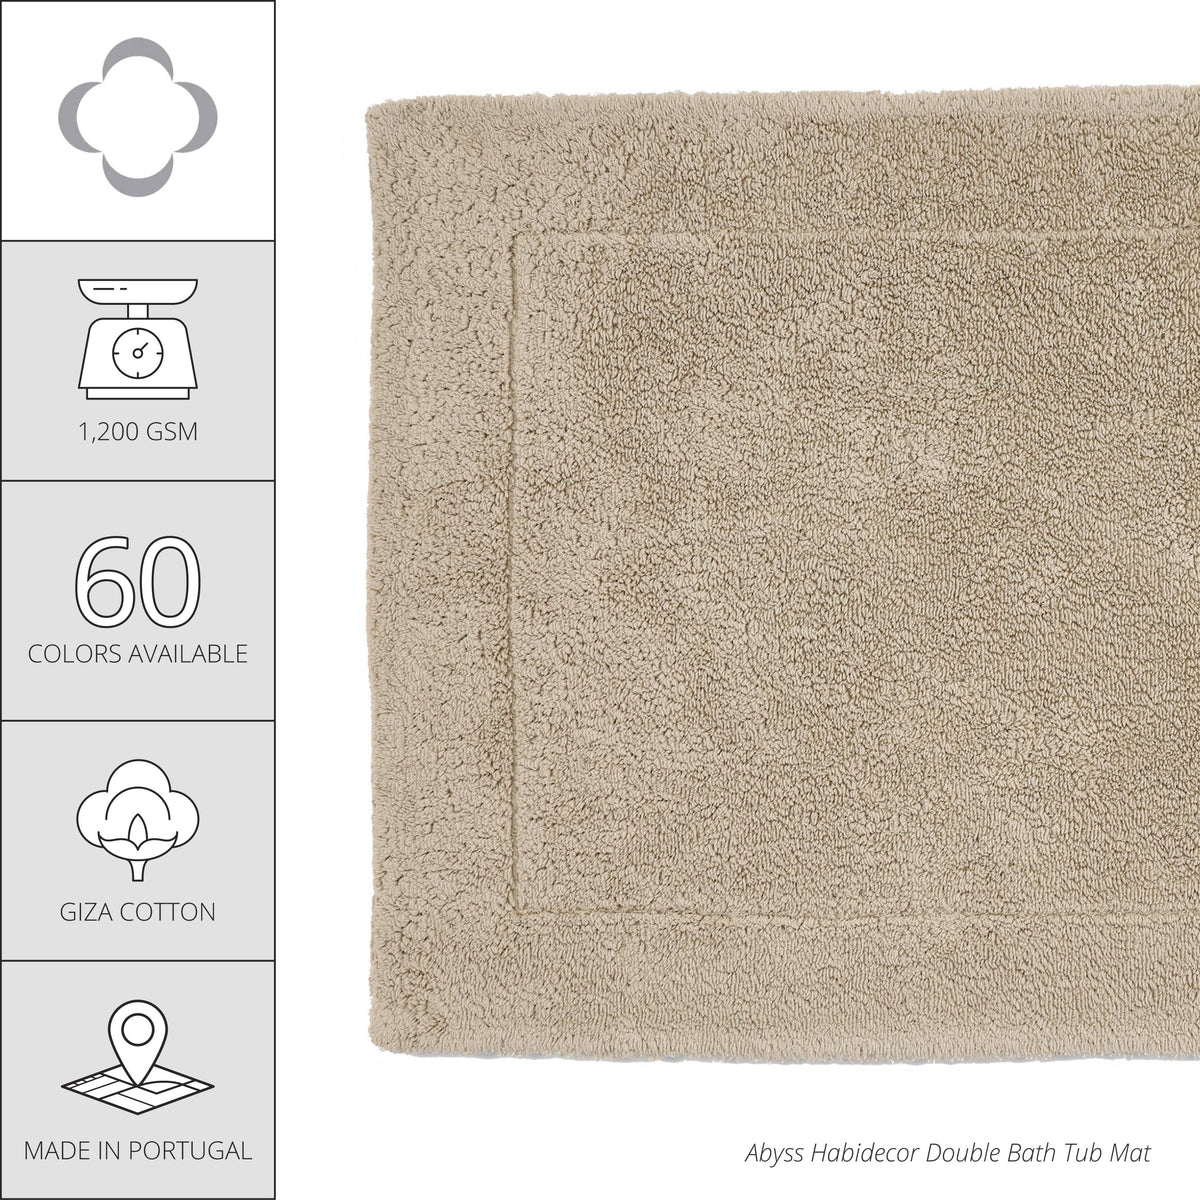 Abyss Double Bath Tub Mat - Atmosphere (940)